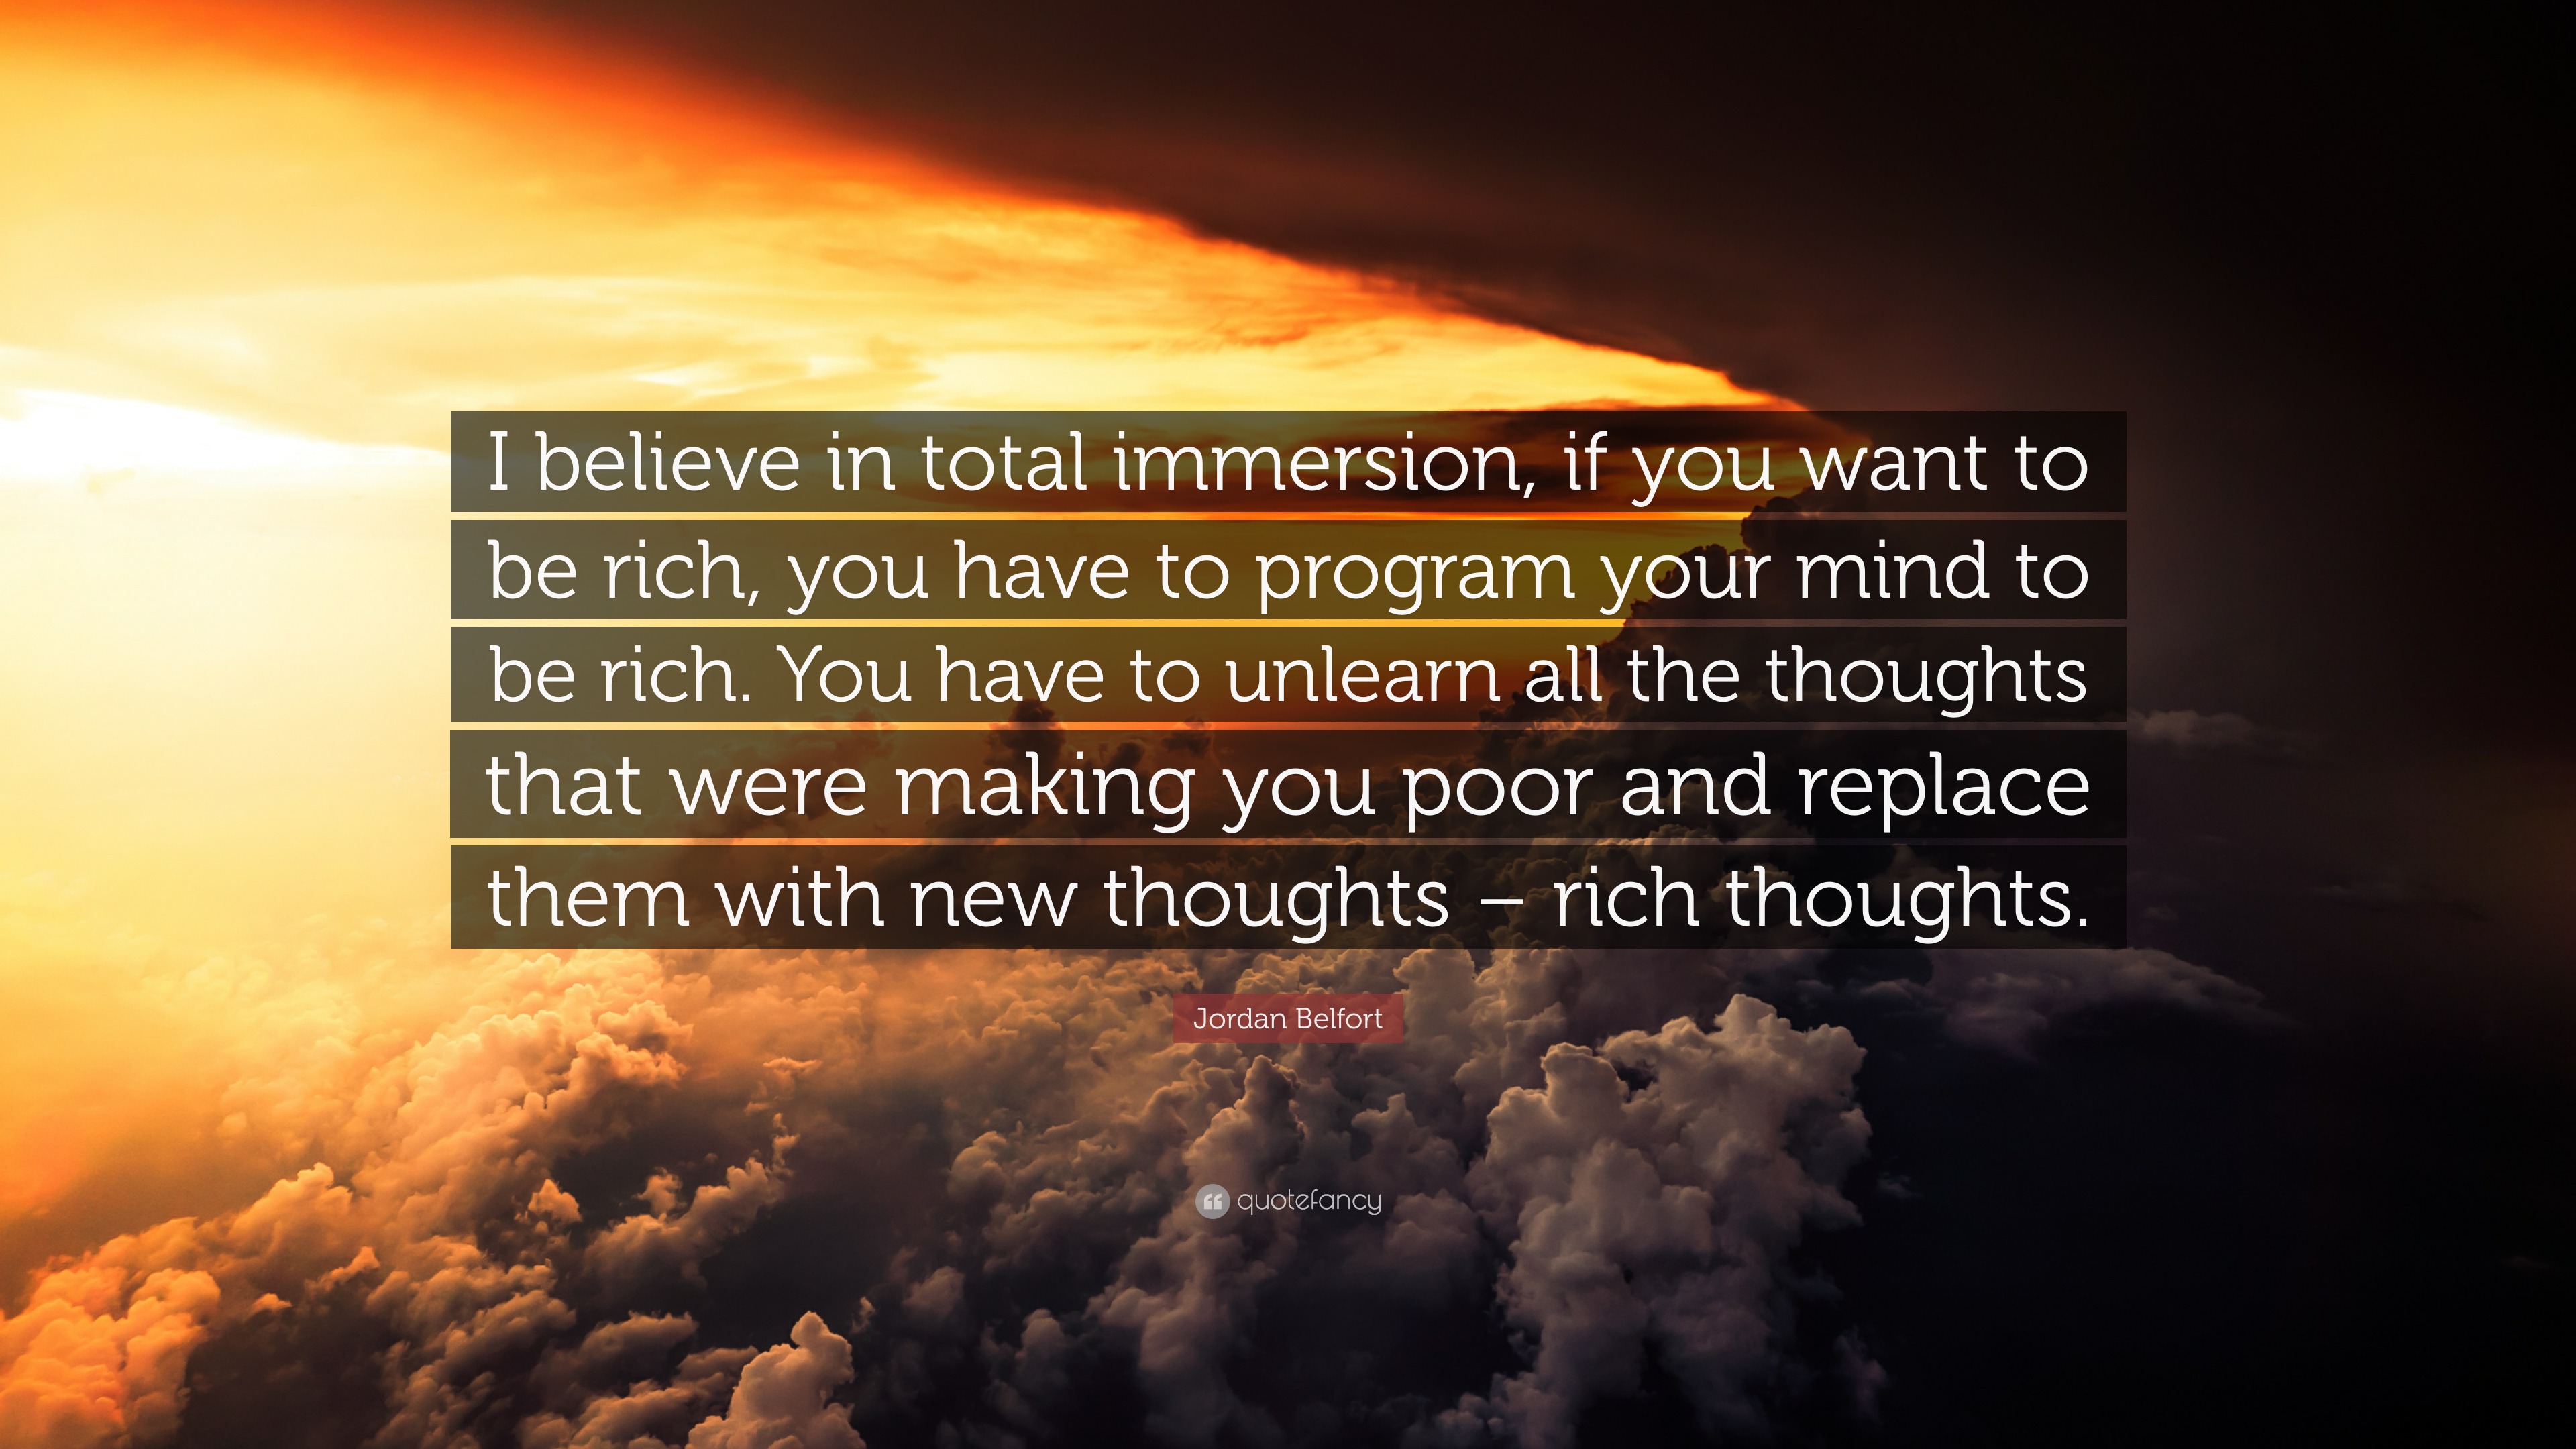 Jordan Belfort Quote: “I believe in total immersion, if you want to be ...